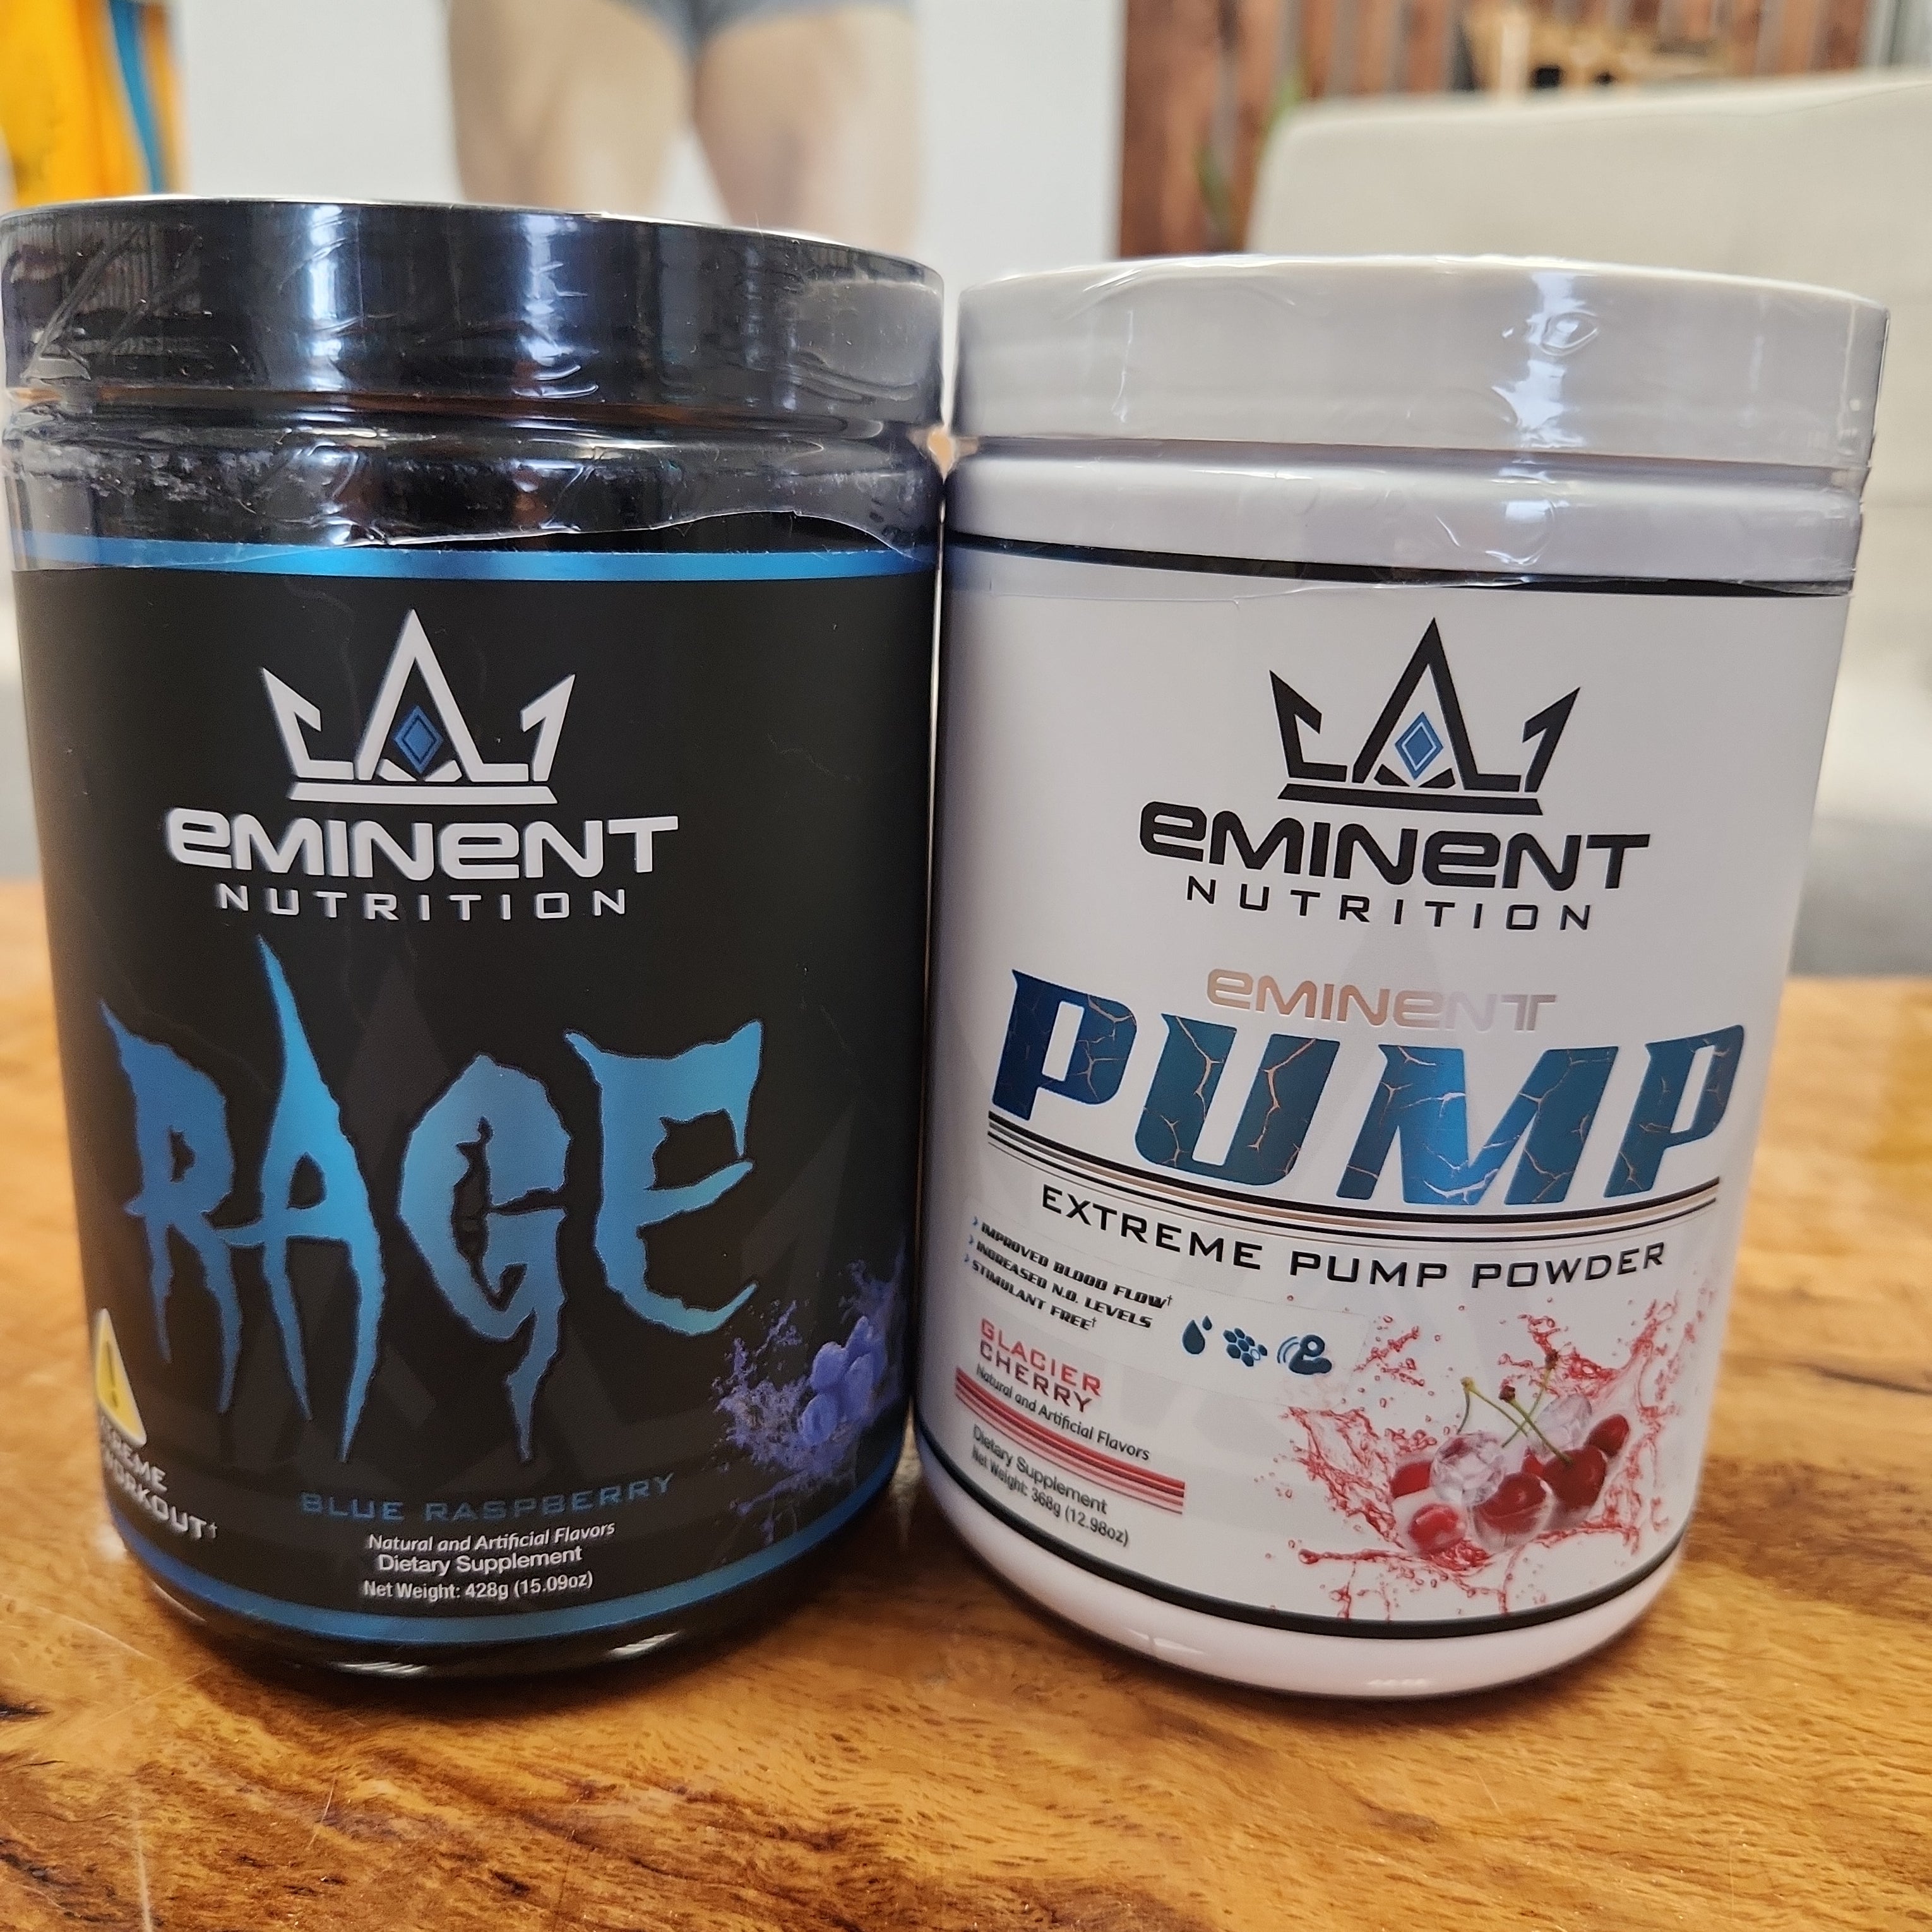 Eminent Nutrition Extreme Pre-Workout Stack